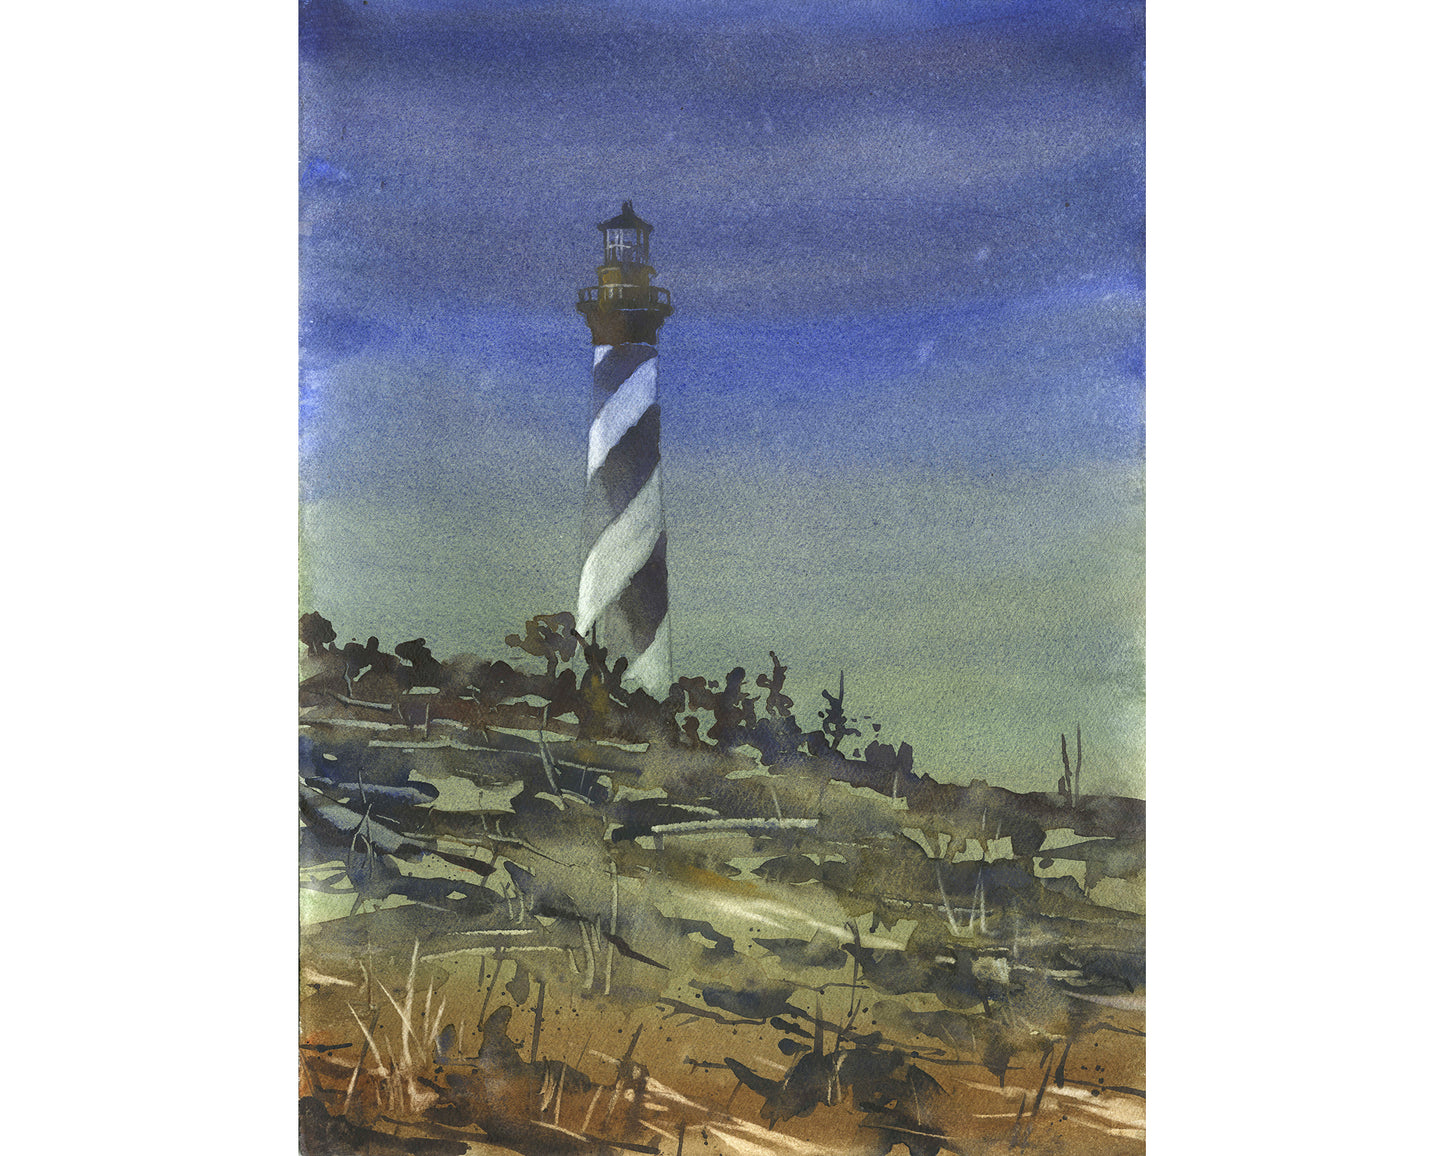 Cape Hatteras lighthouse in the Outer Banks, North Carolina.  OBX artwork coastal painting beach house artwork (original)